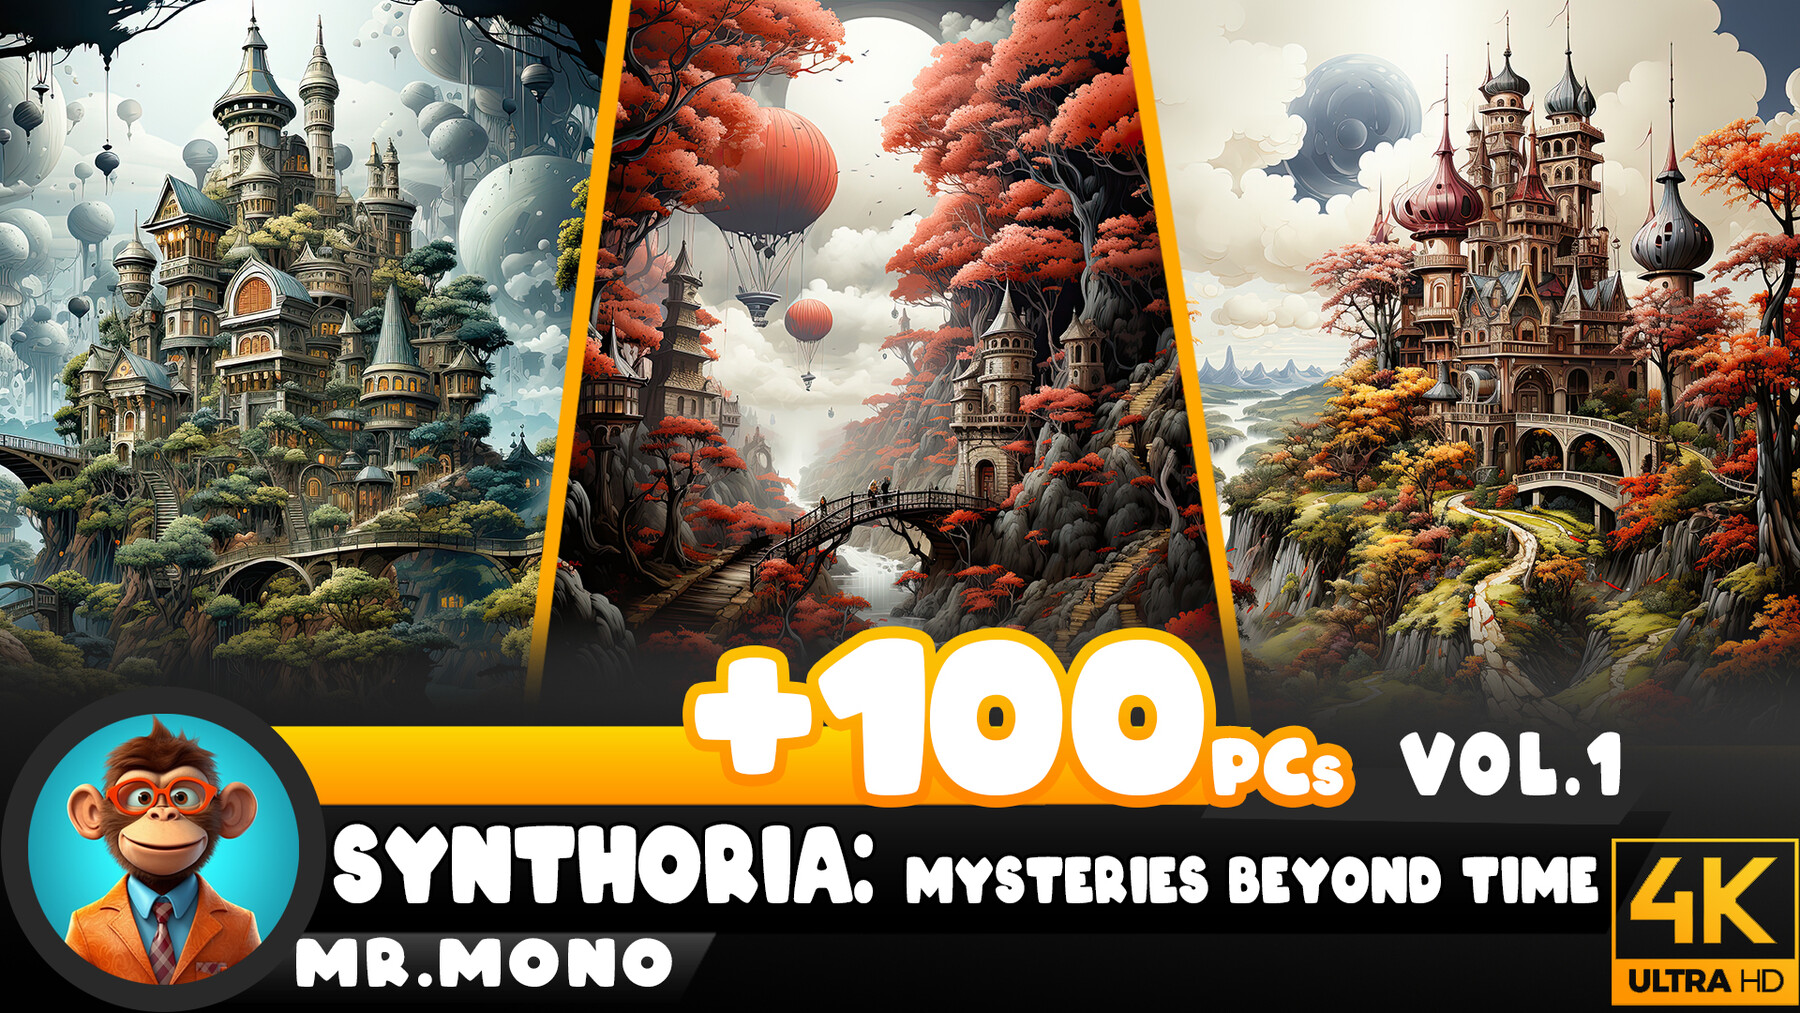 Synthoria: Mysteries Beyond Time Vol.1 | Reference Images